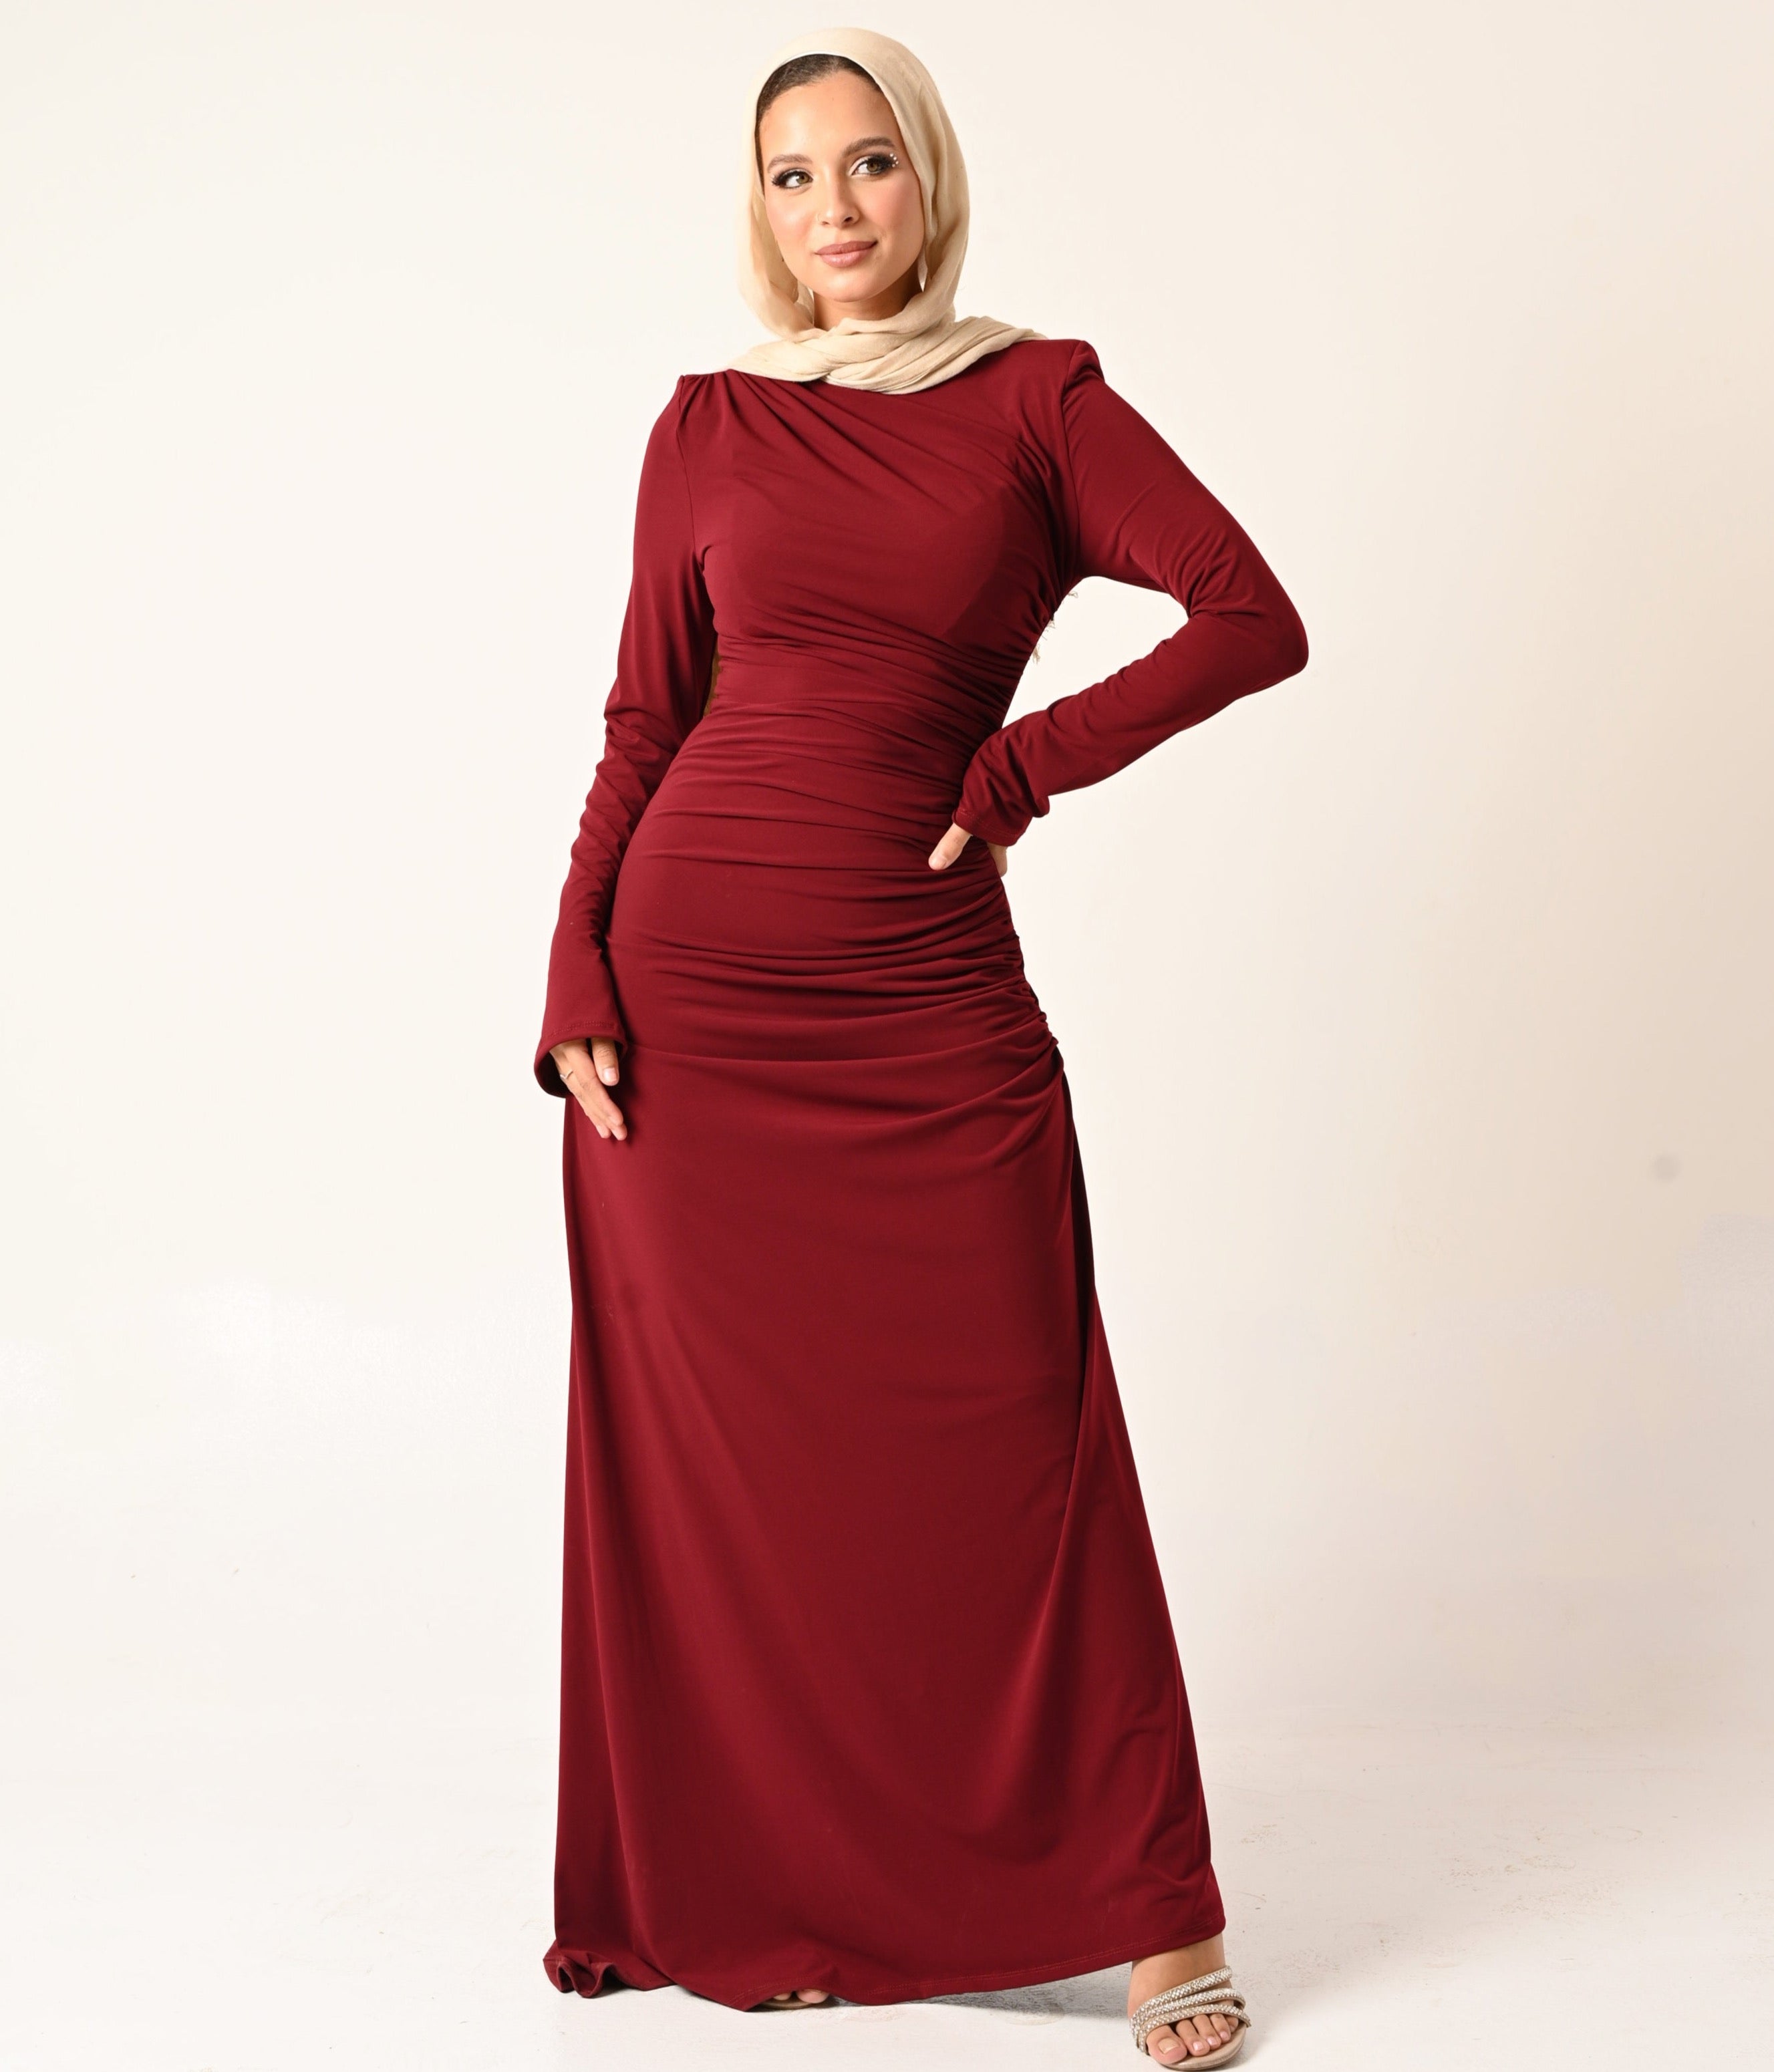 Rouched Side Dress in dark red